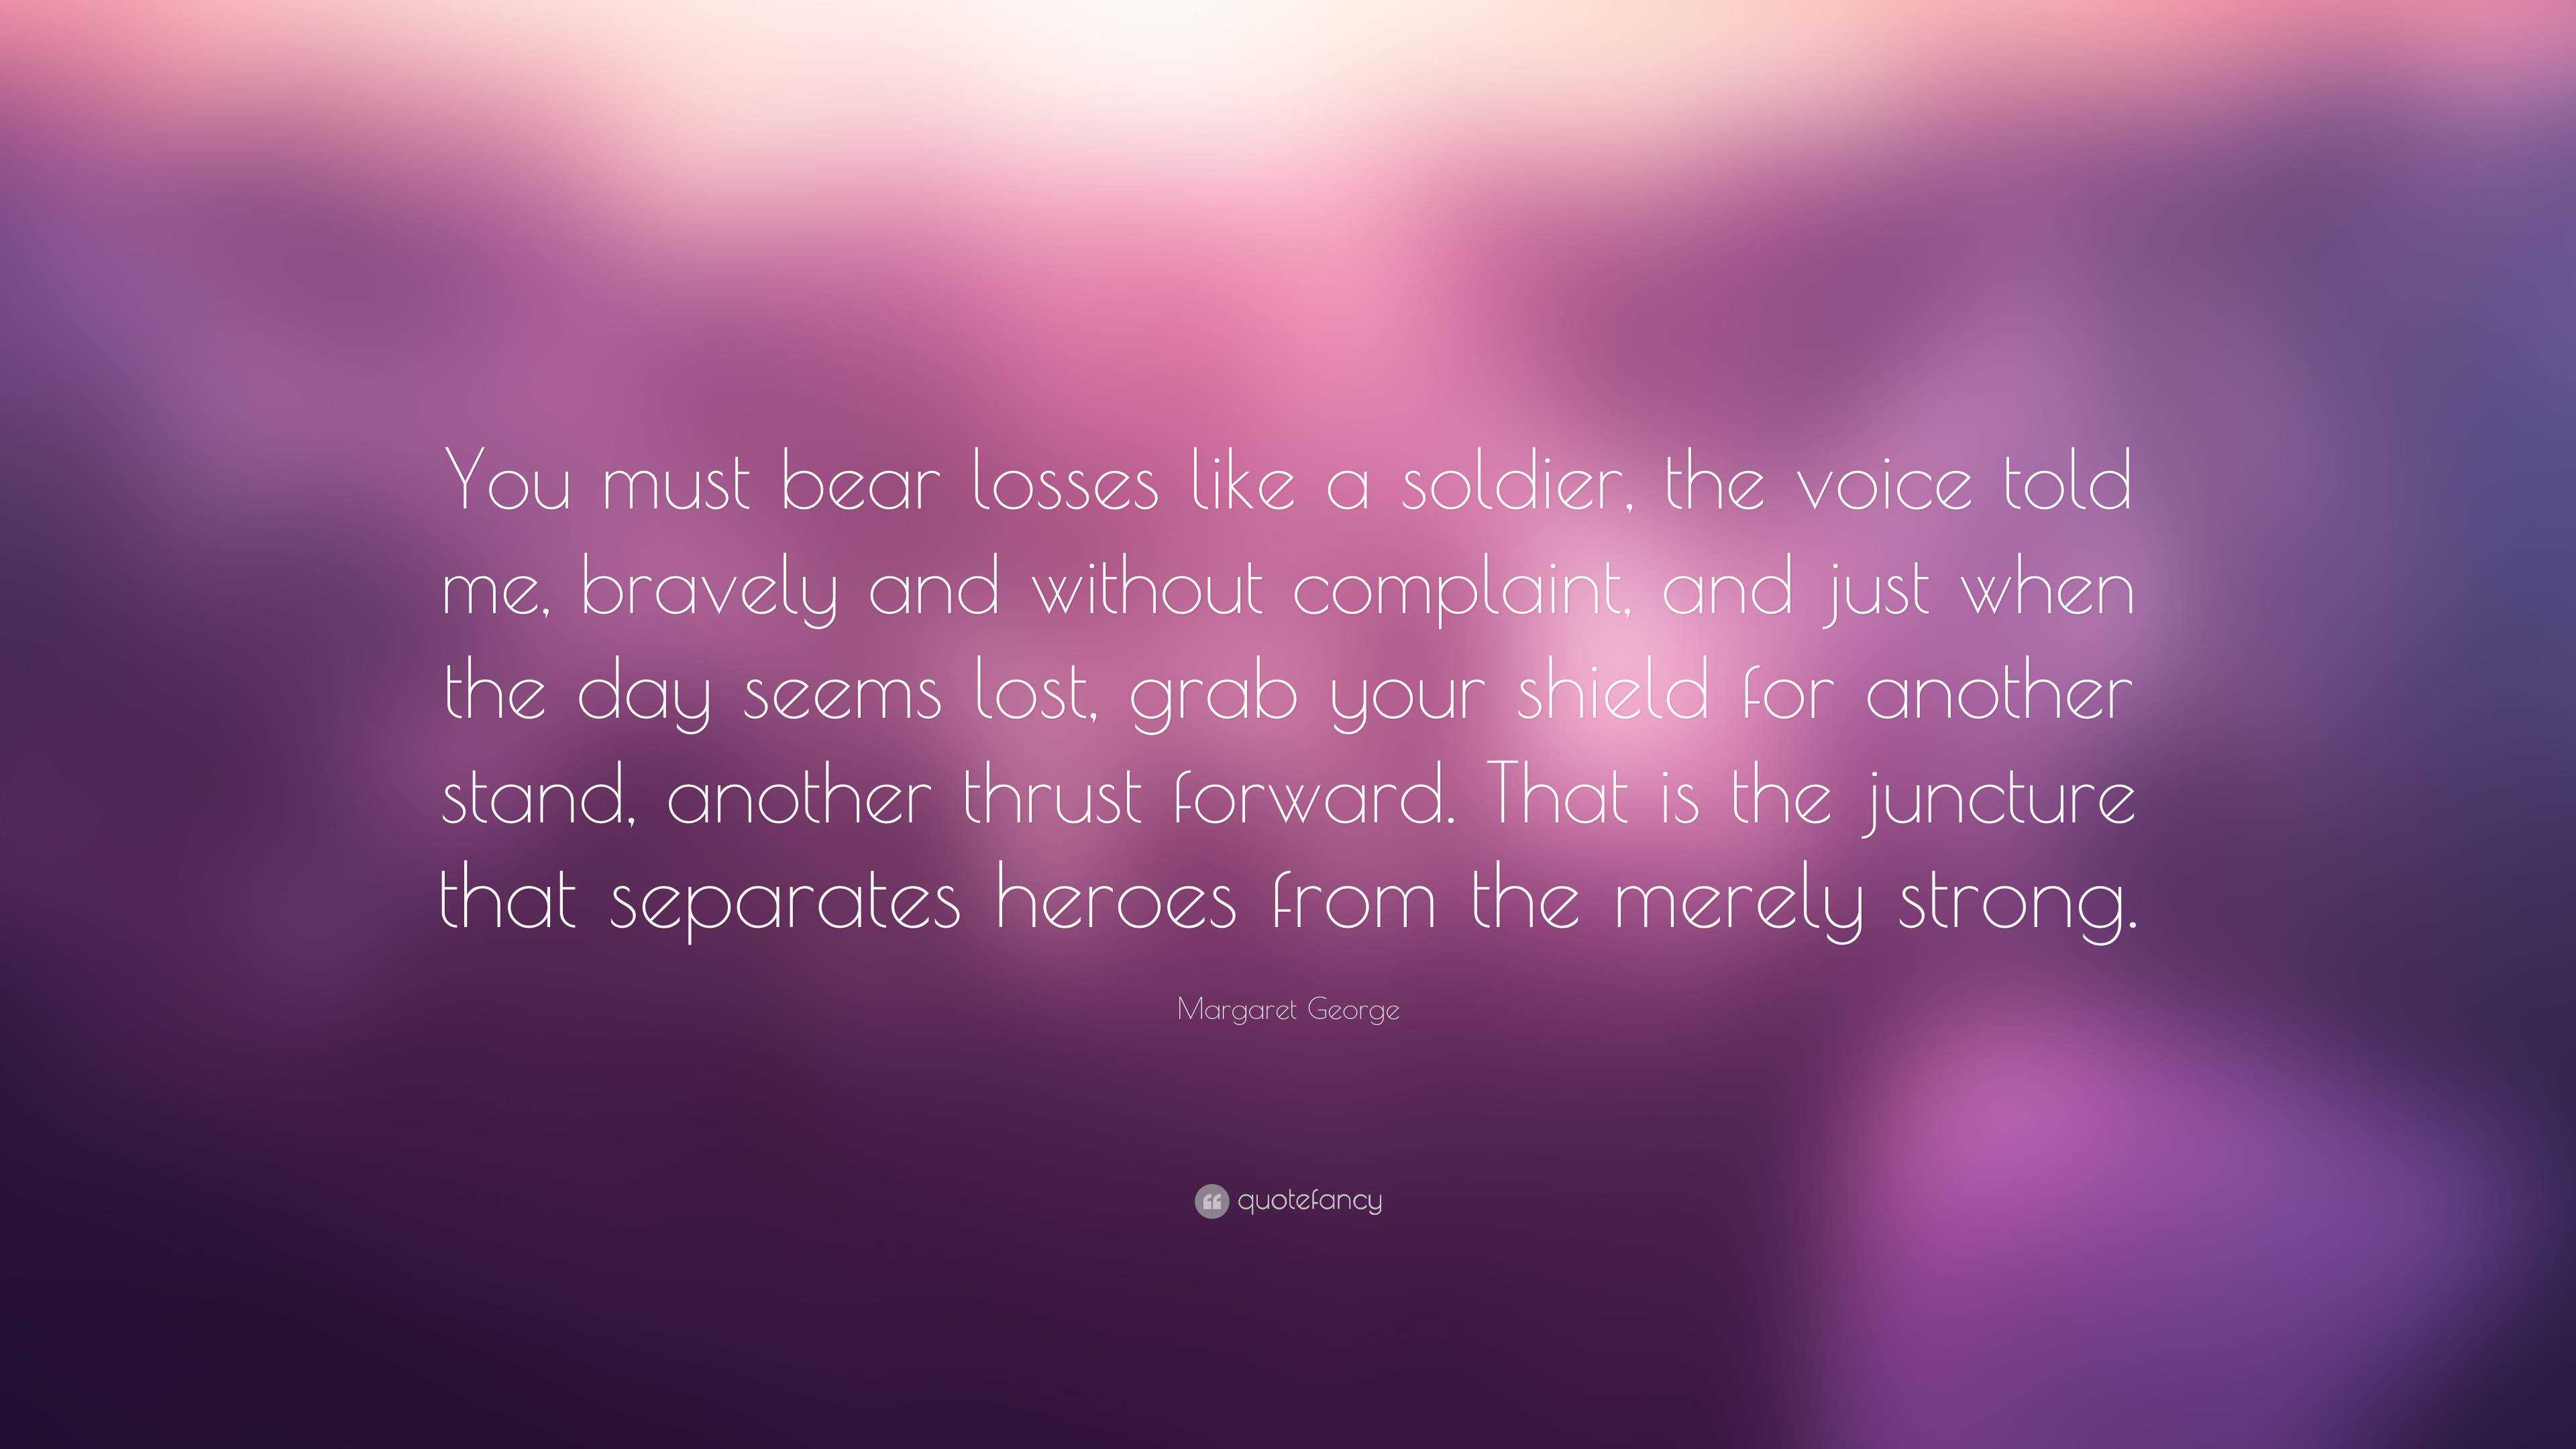 Margaret George Quote: “You must bear losses like a soldier, the voice ...